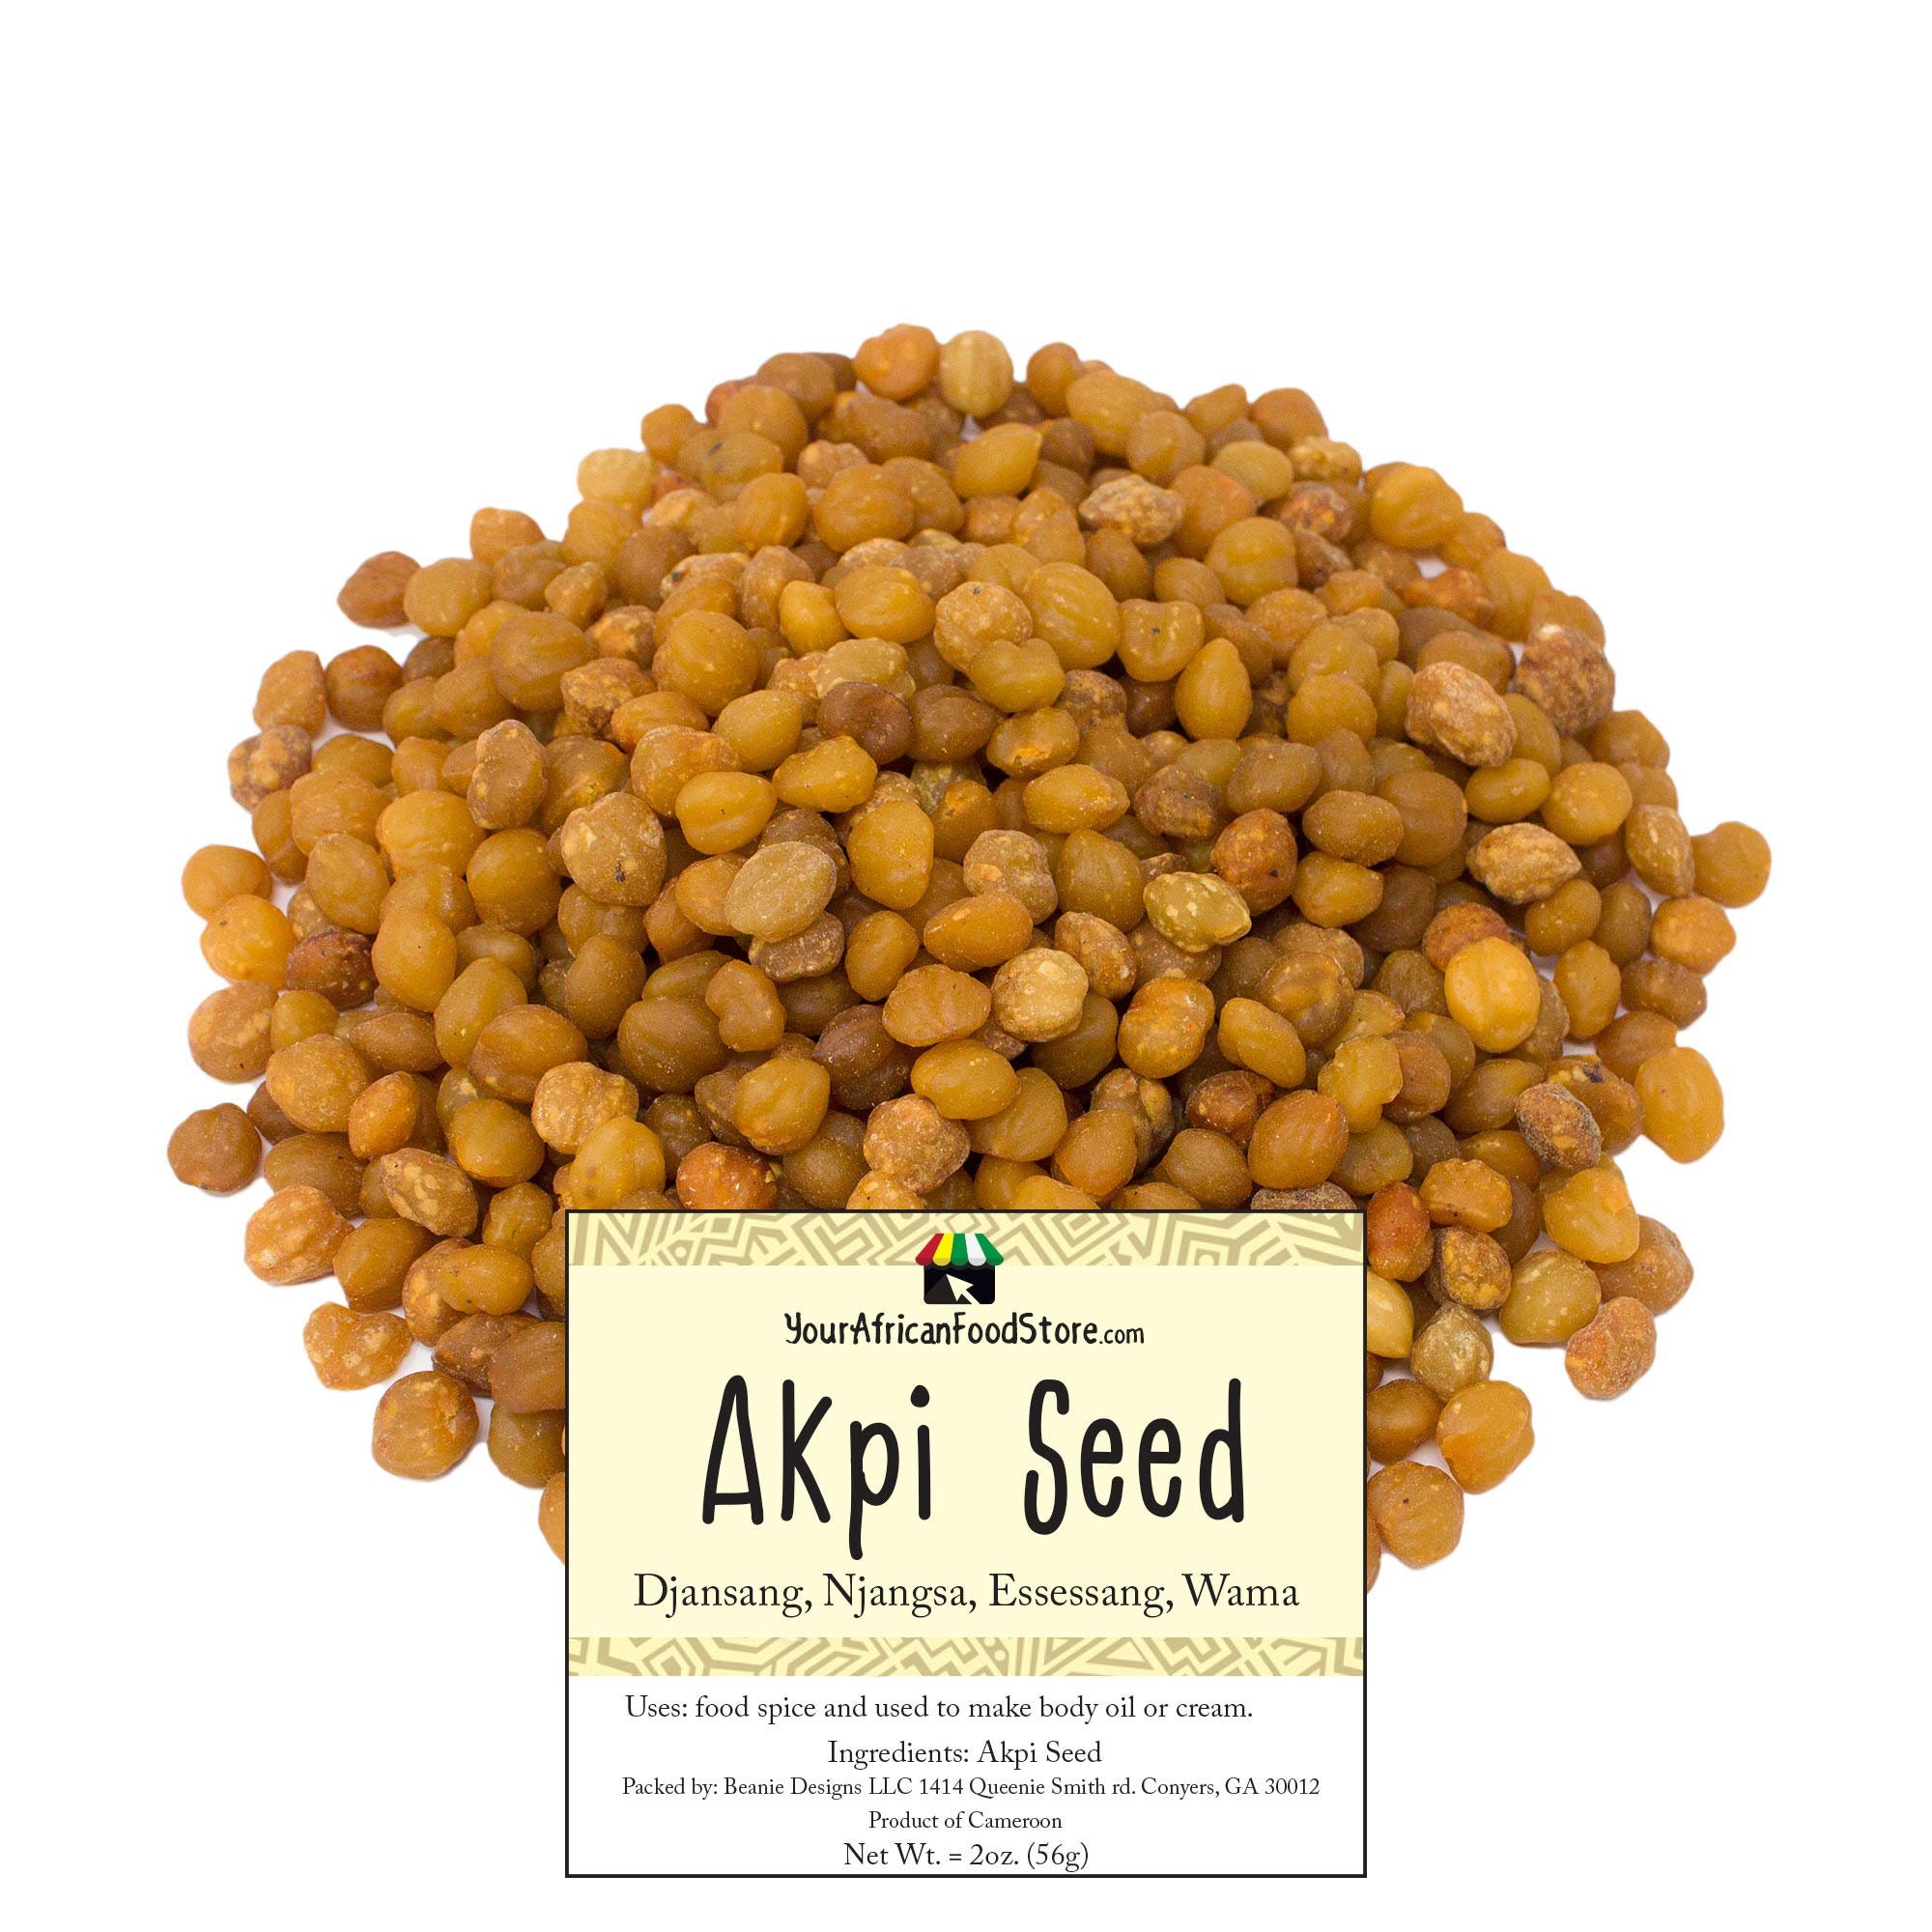 Akpi seeds of akpi /ndjansang - Spices, Plants, Roots and Powders